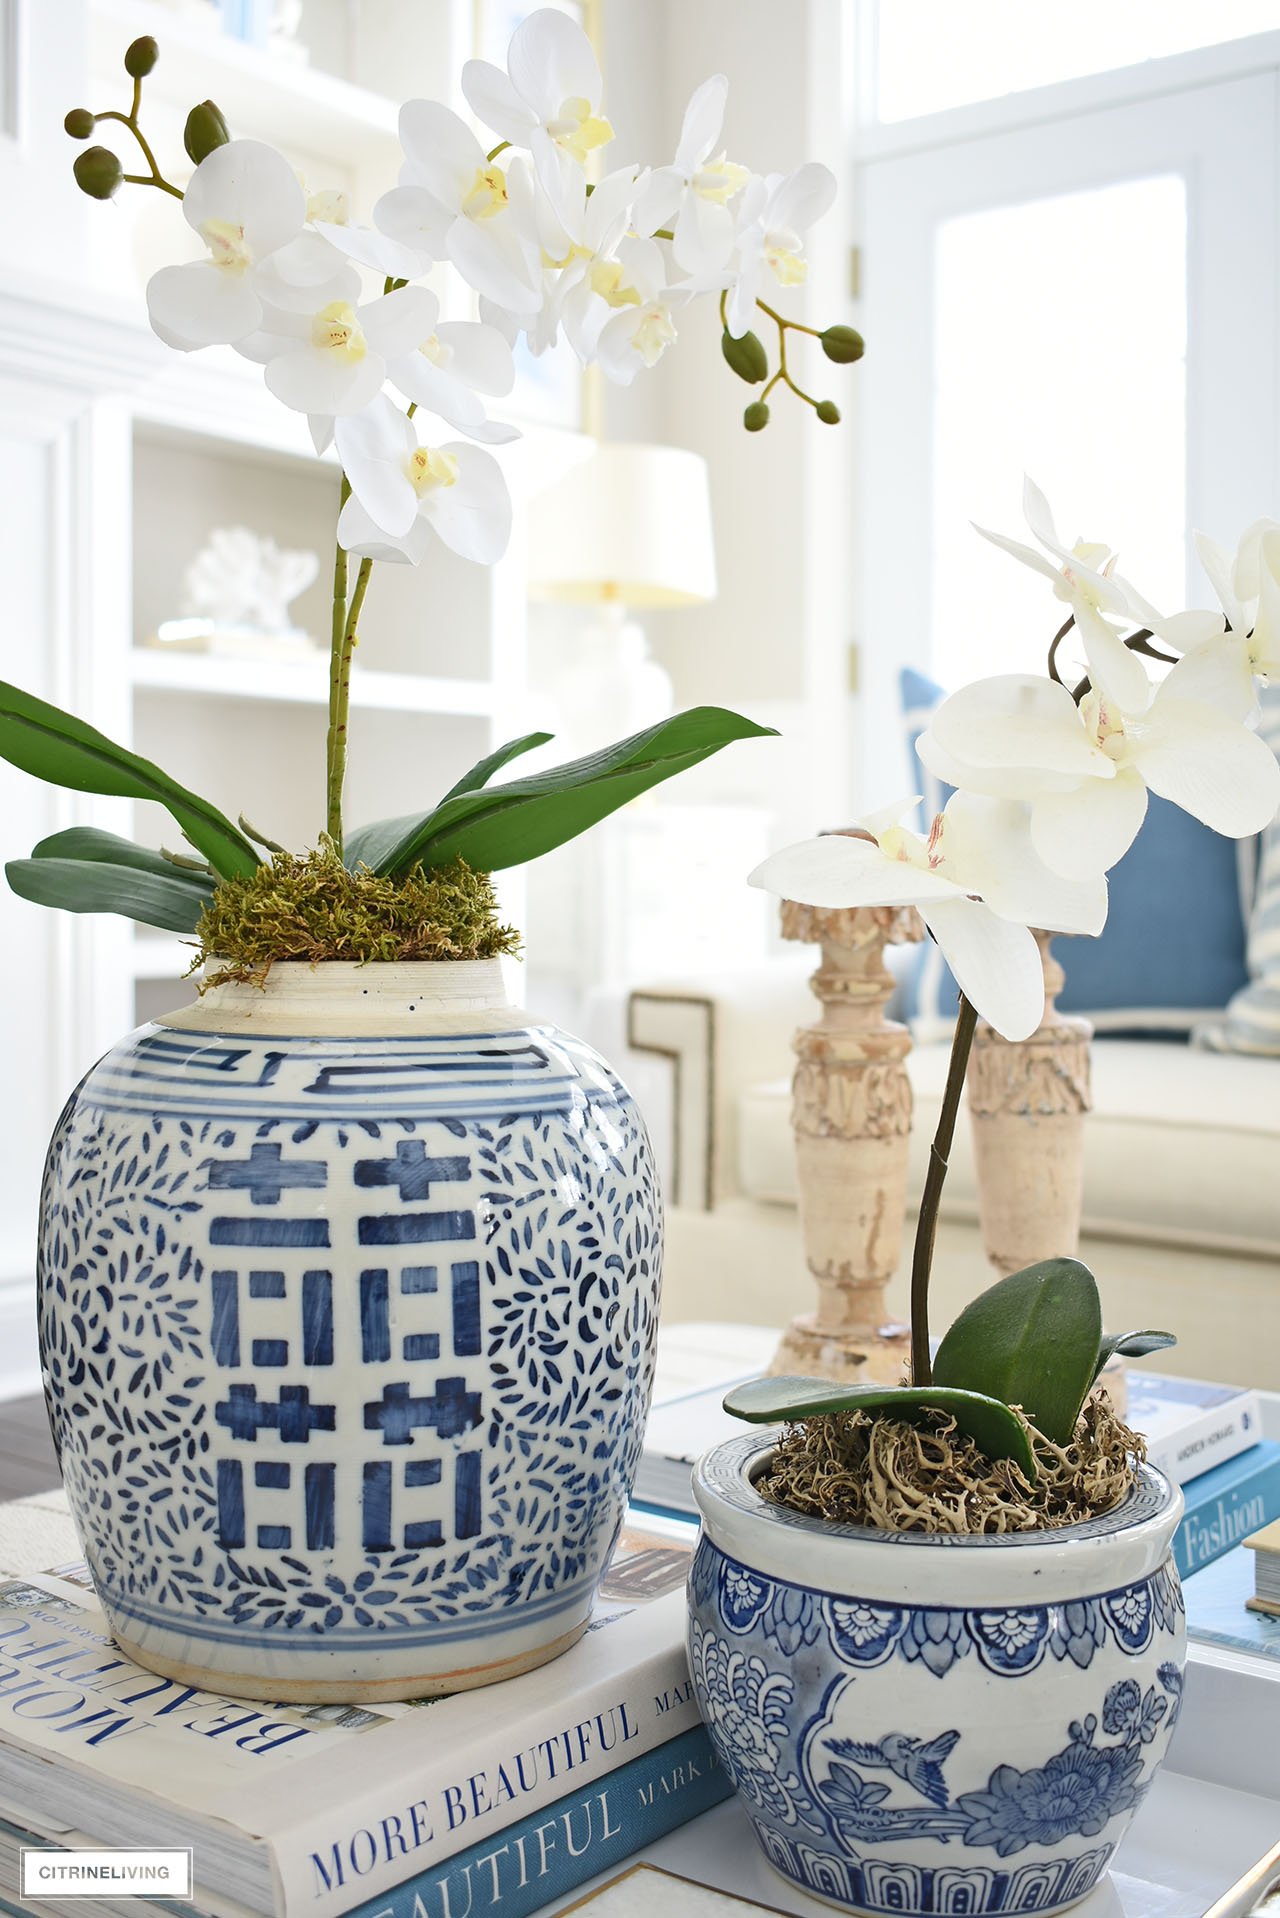 Orchid arrangements in blue and white planters.